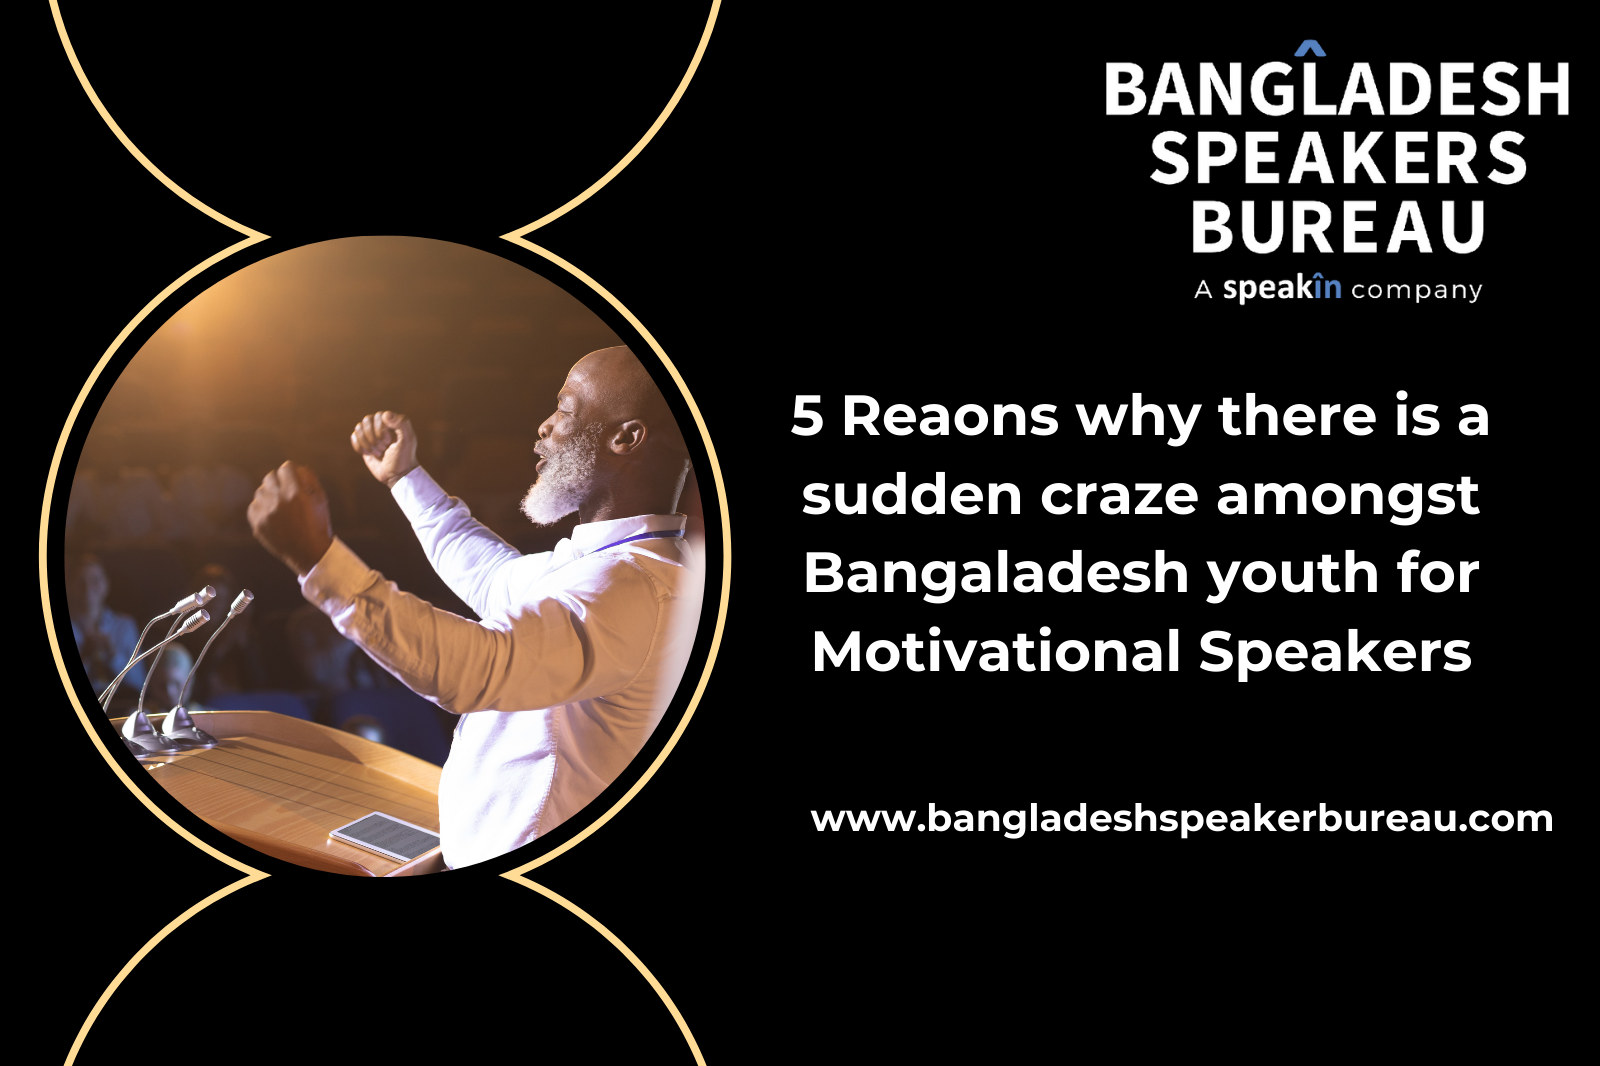 5 Reasons Why There is a Sudden Craze Amongst Bangladesh Youth for Motivational Speakers